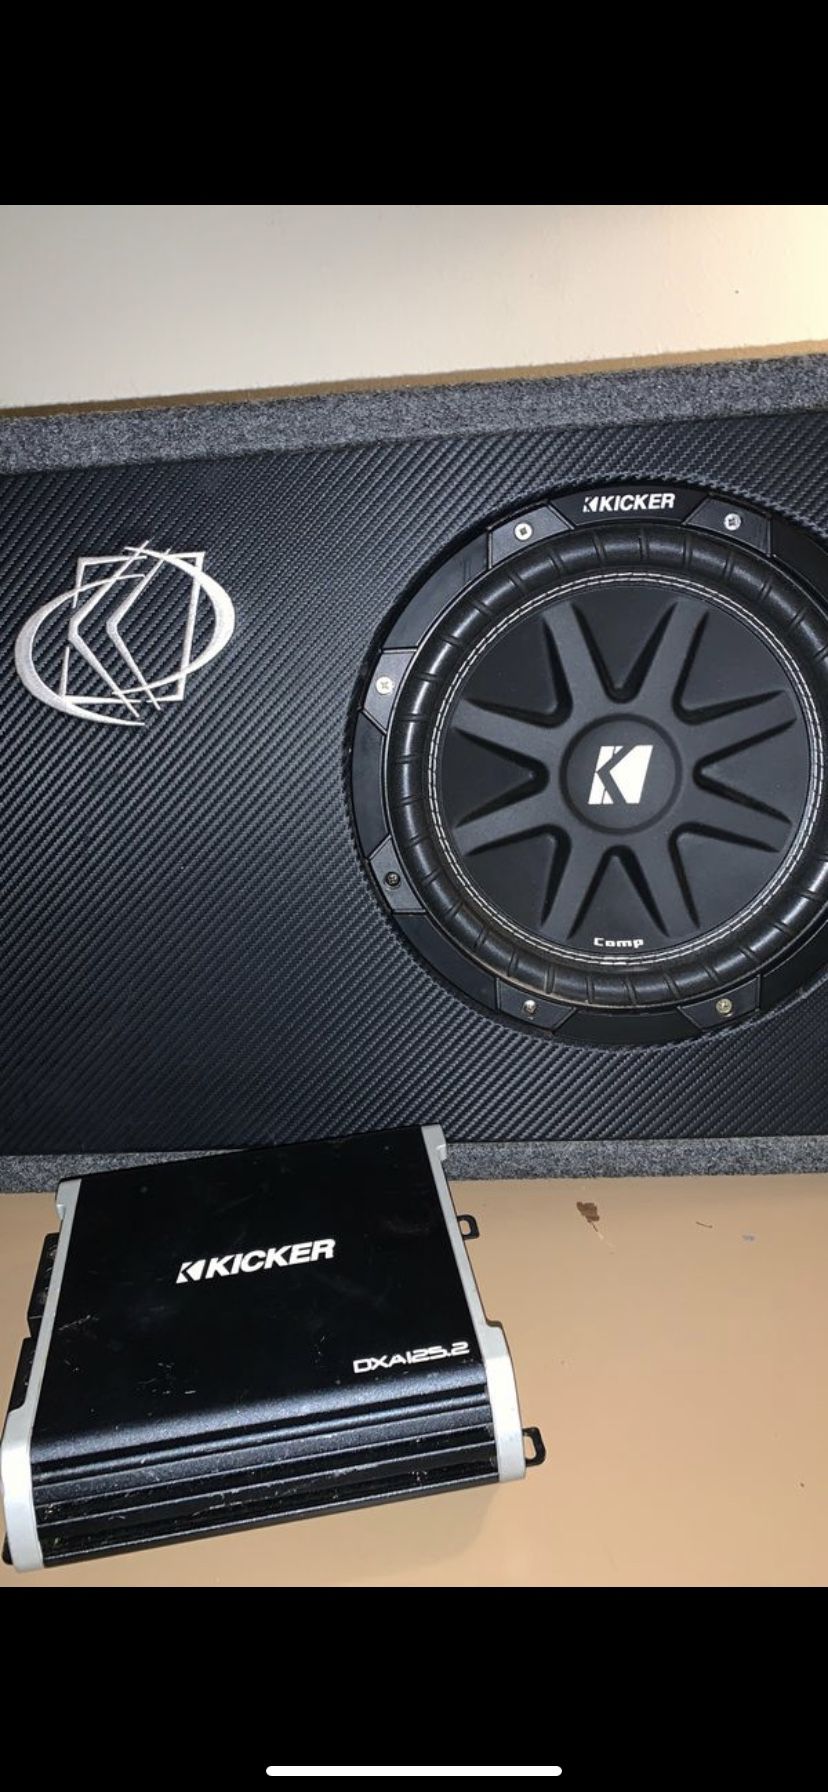 Kicker competition subwoofer